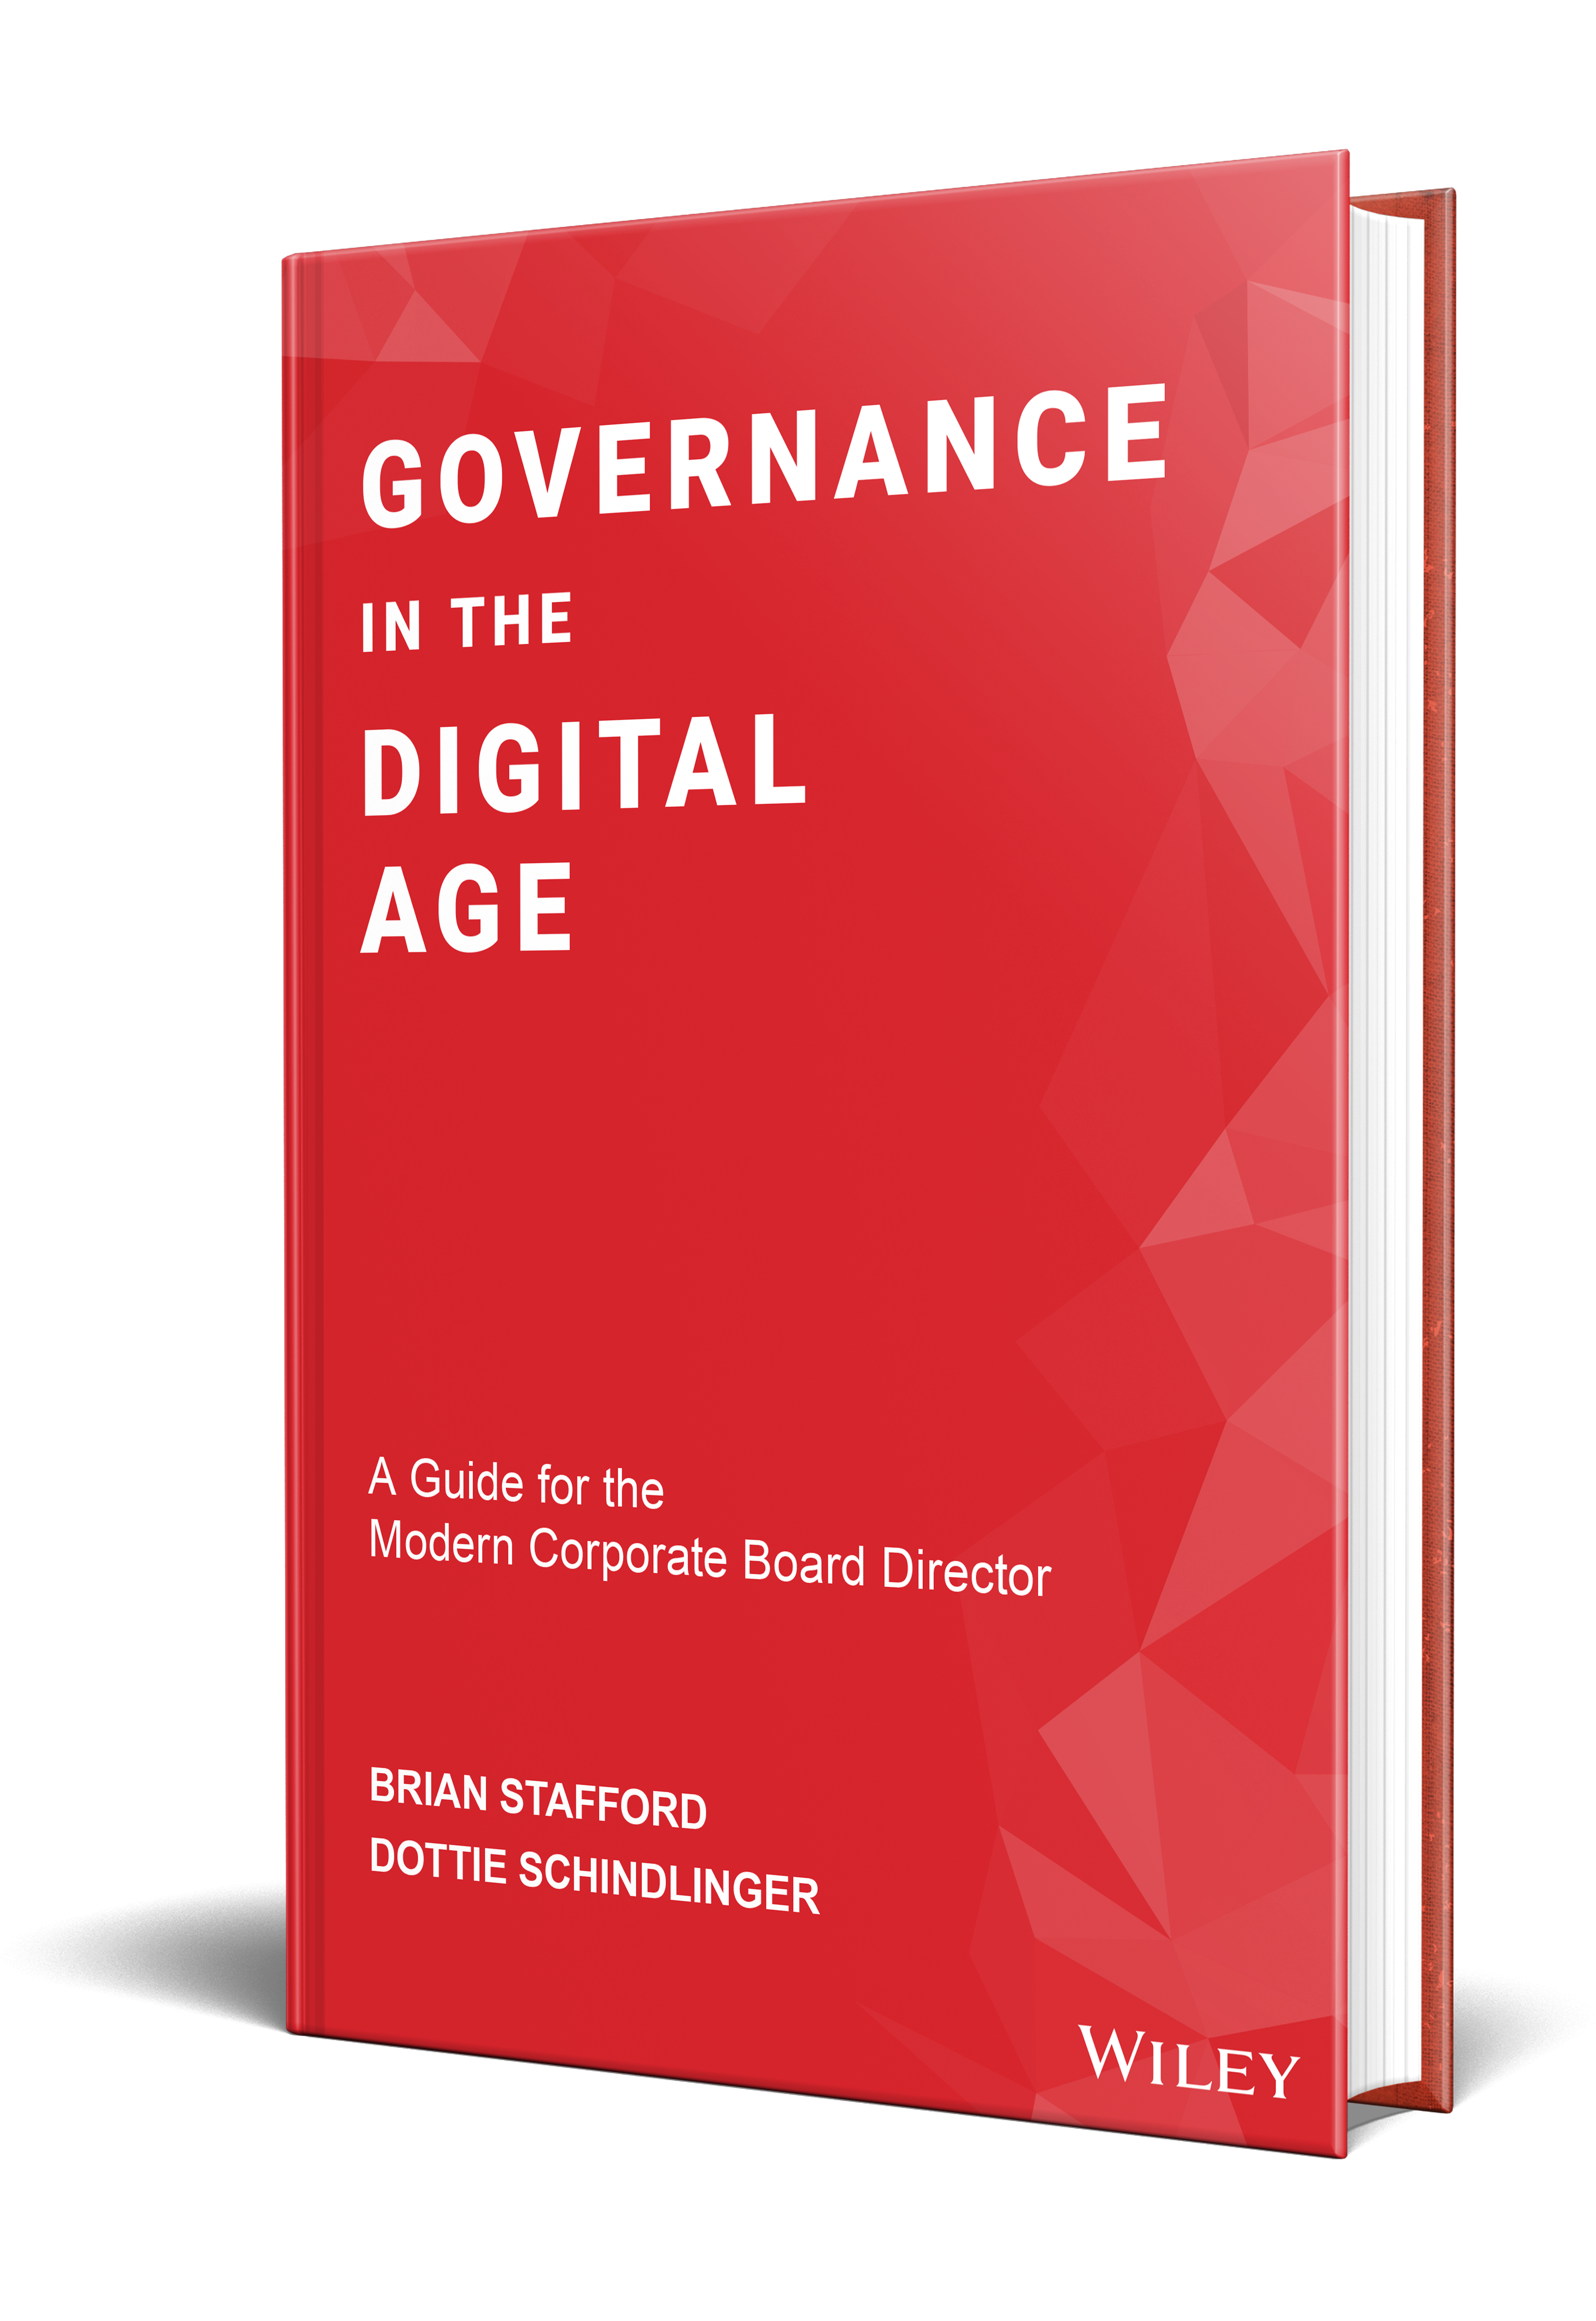 Governance in a digital age